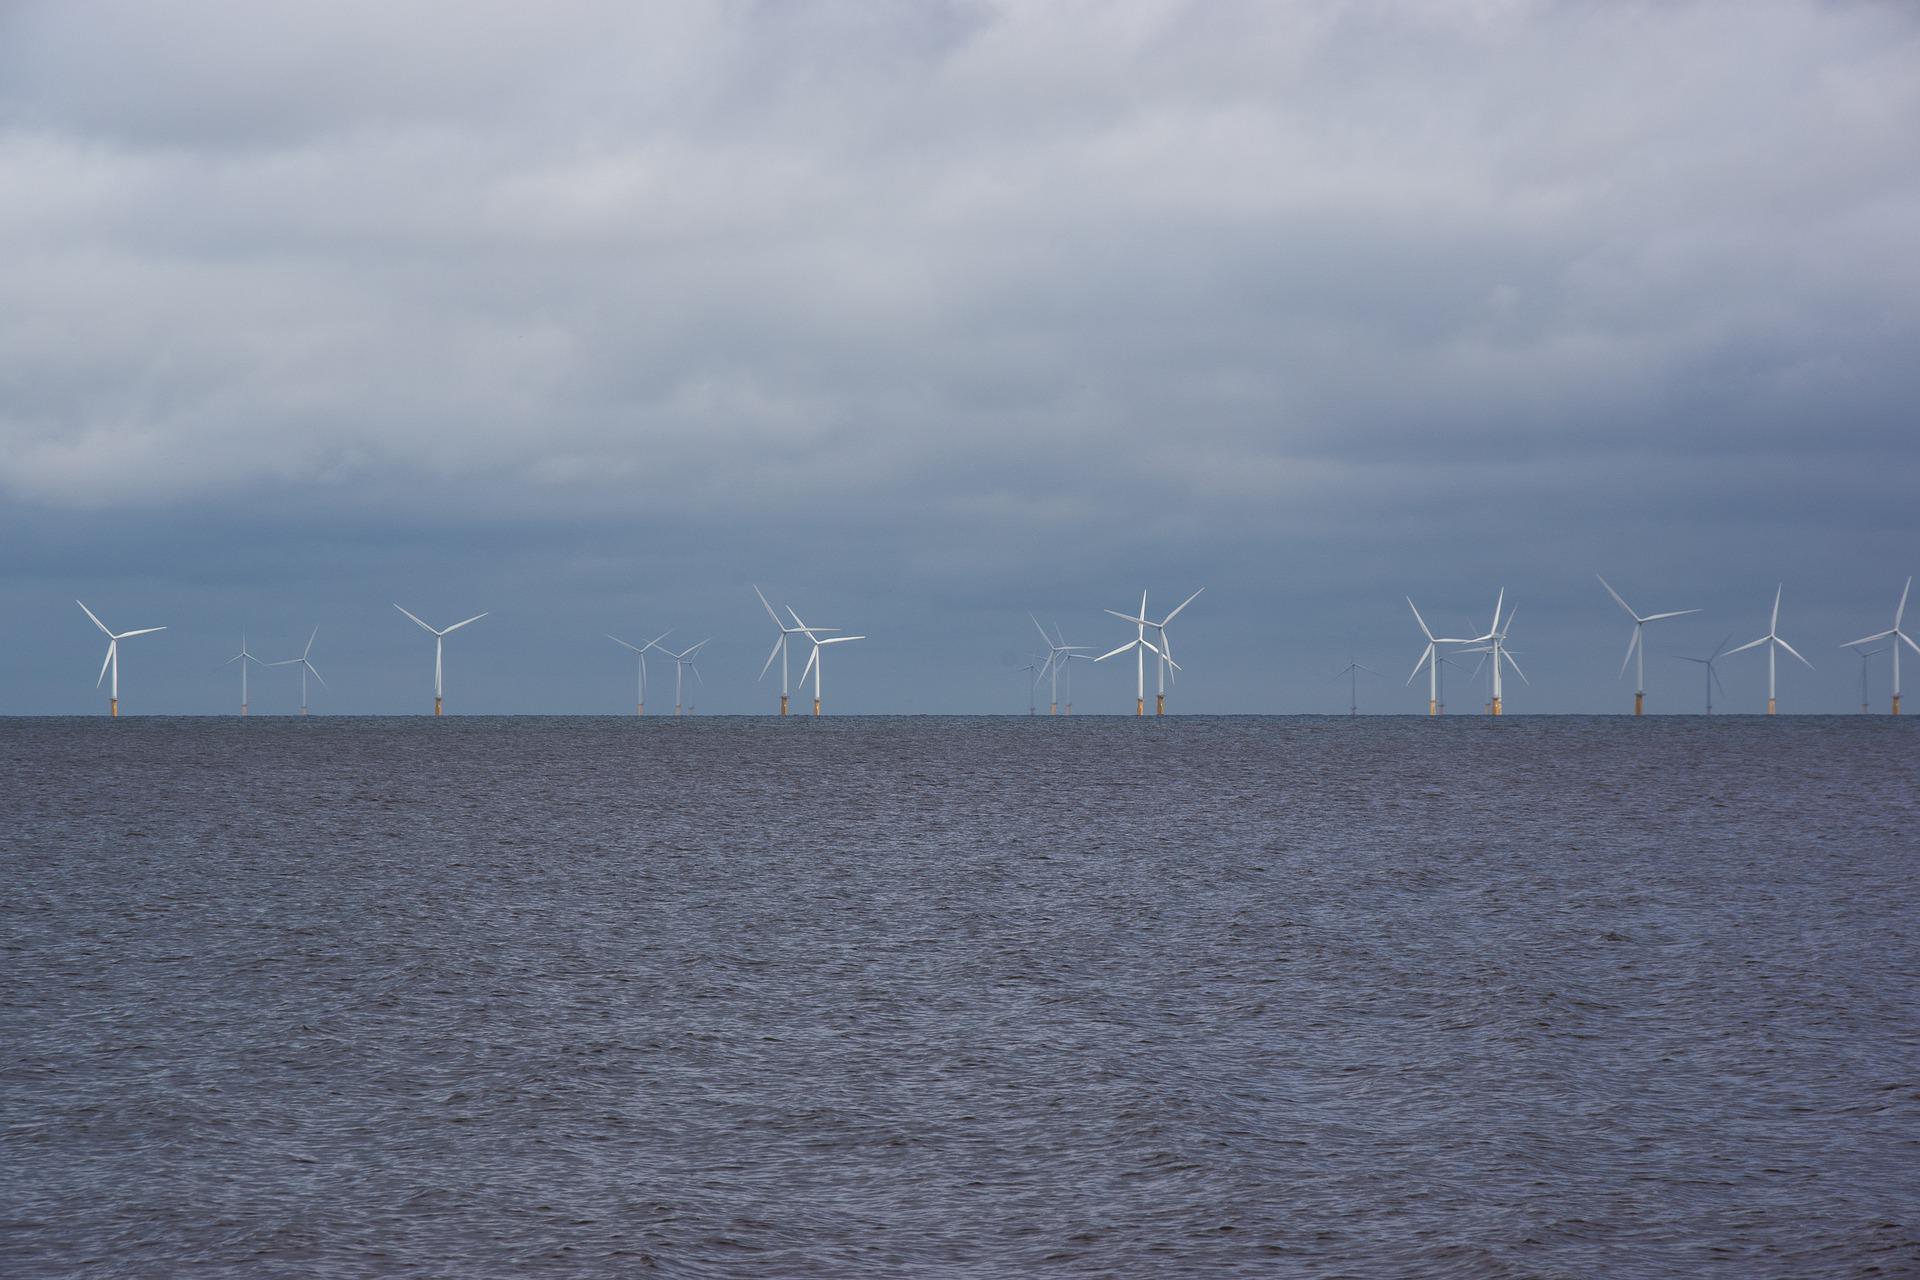 Ocean Winds to invest €3bn to develop offshore wind projects